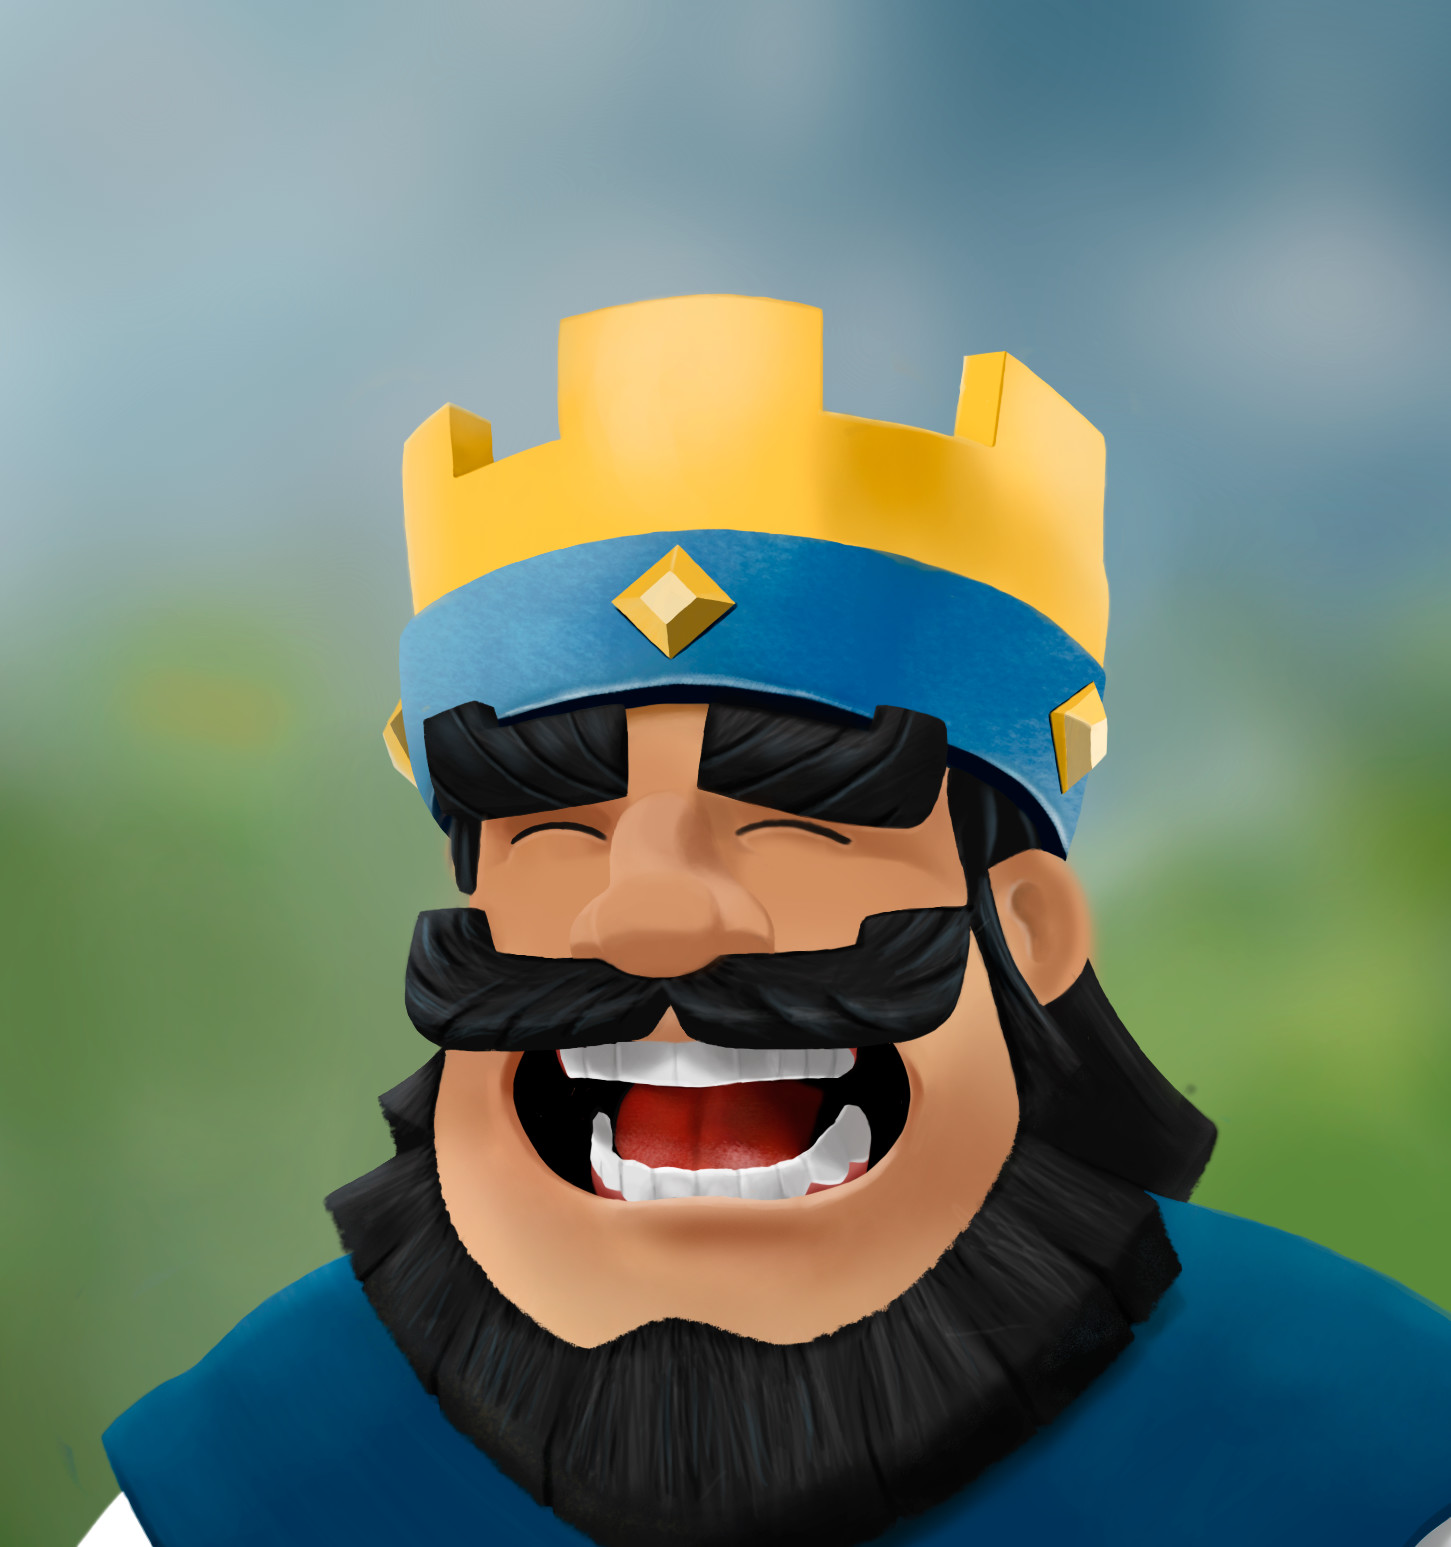 Pin on clash royale